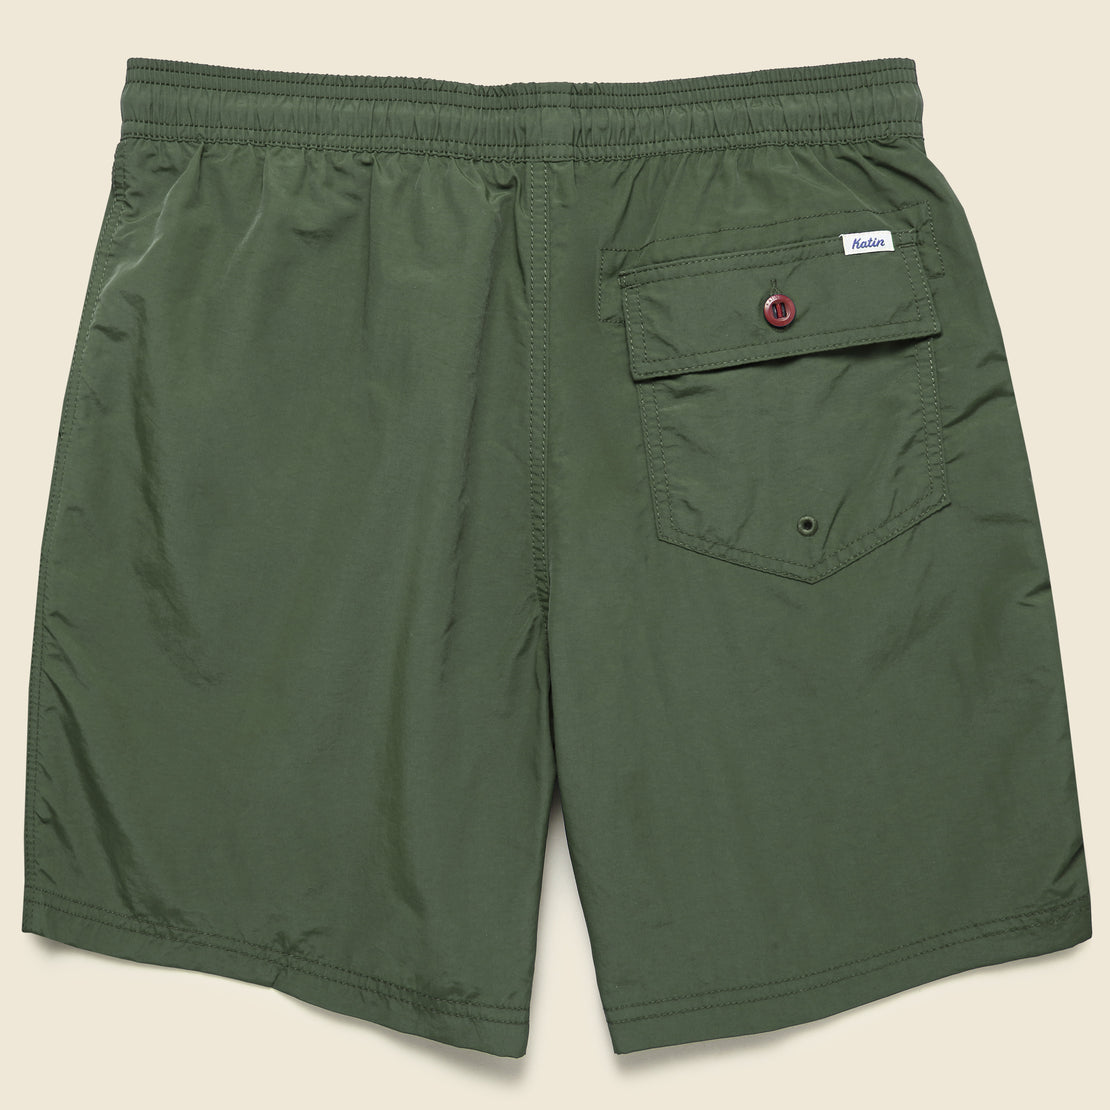 Poolside Volley Trunk - Olive - Katin - STAG Provisions - Shorts - Swim